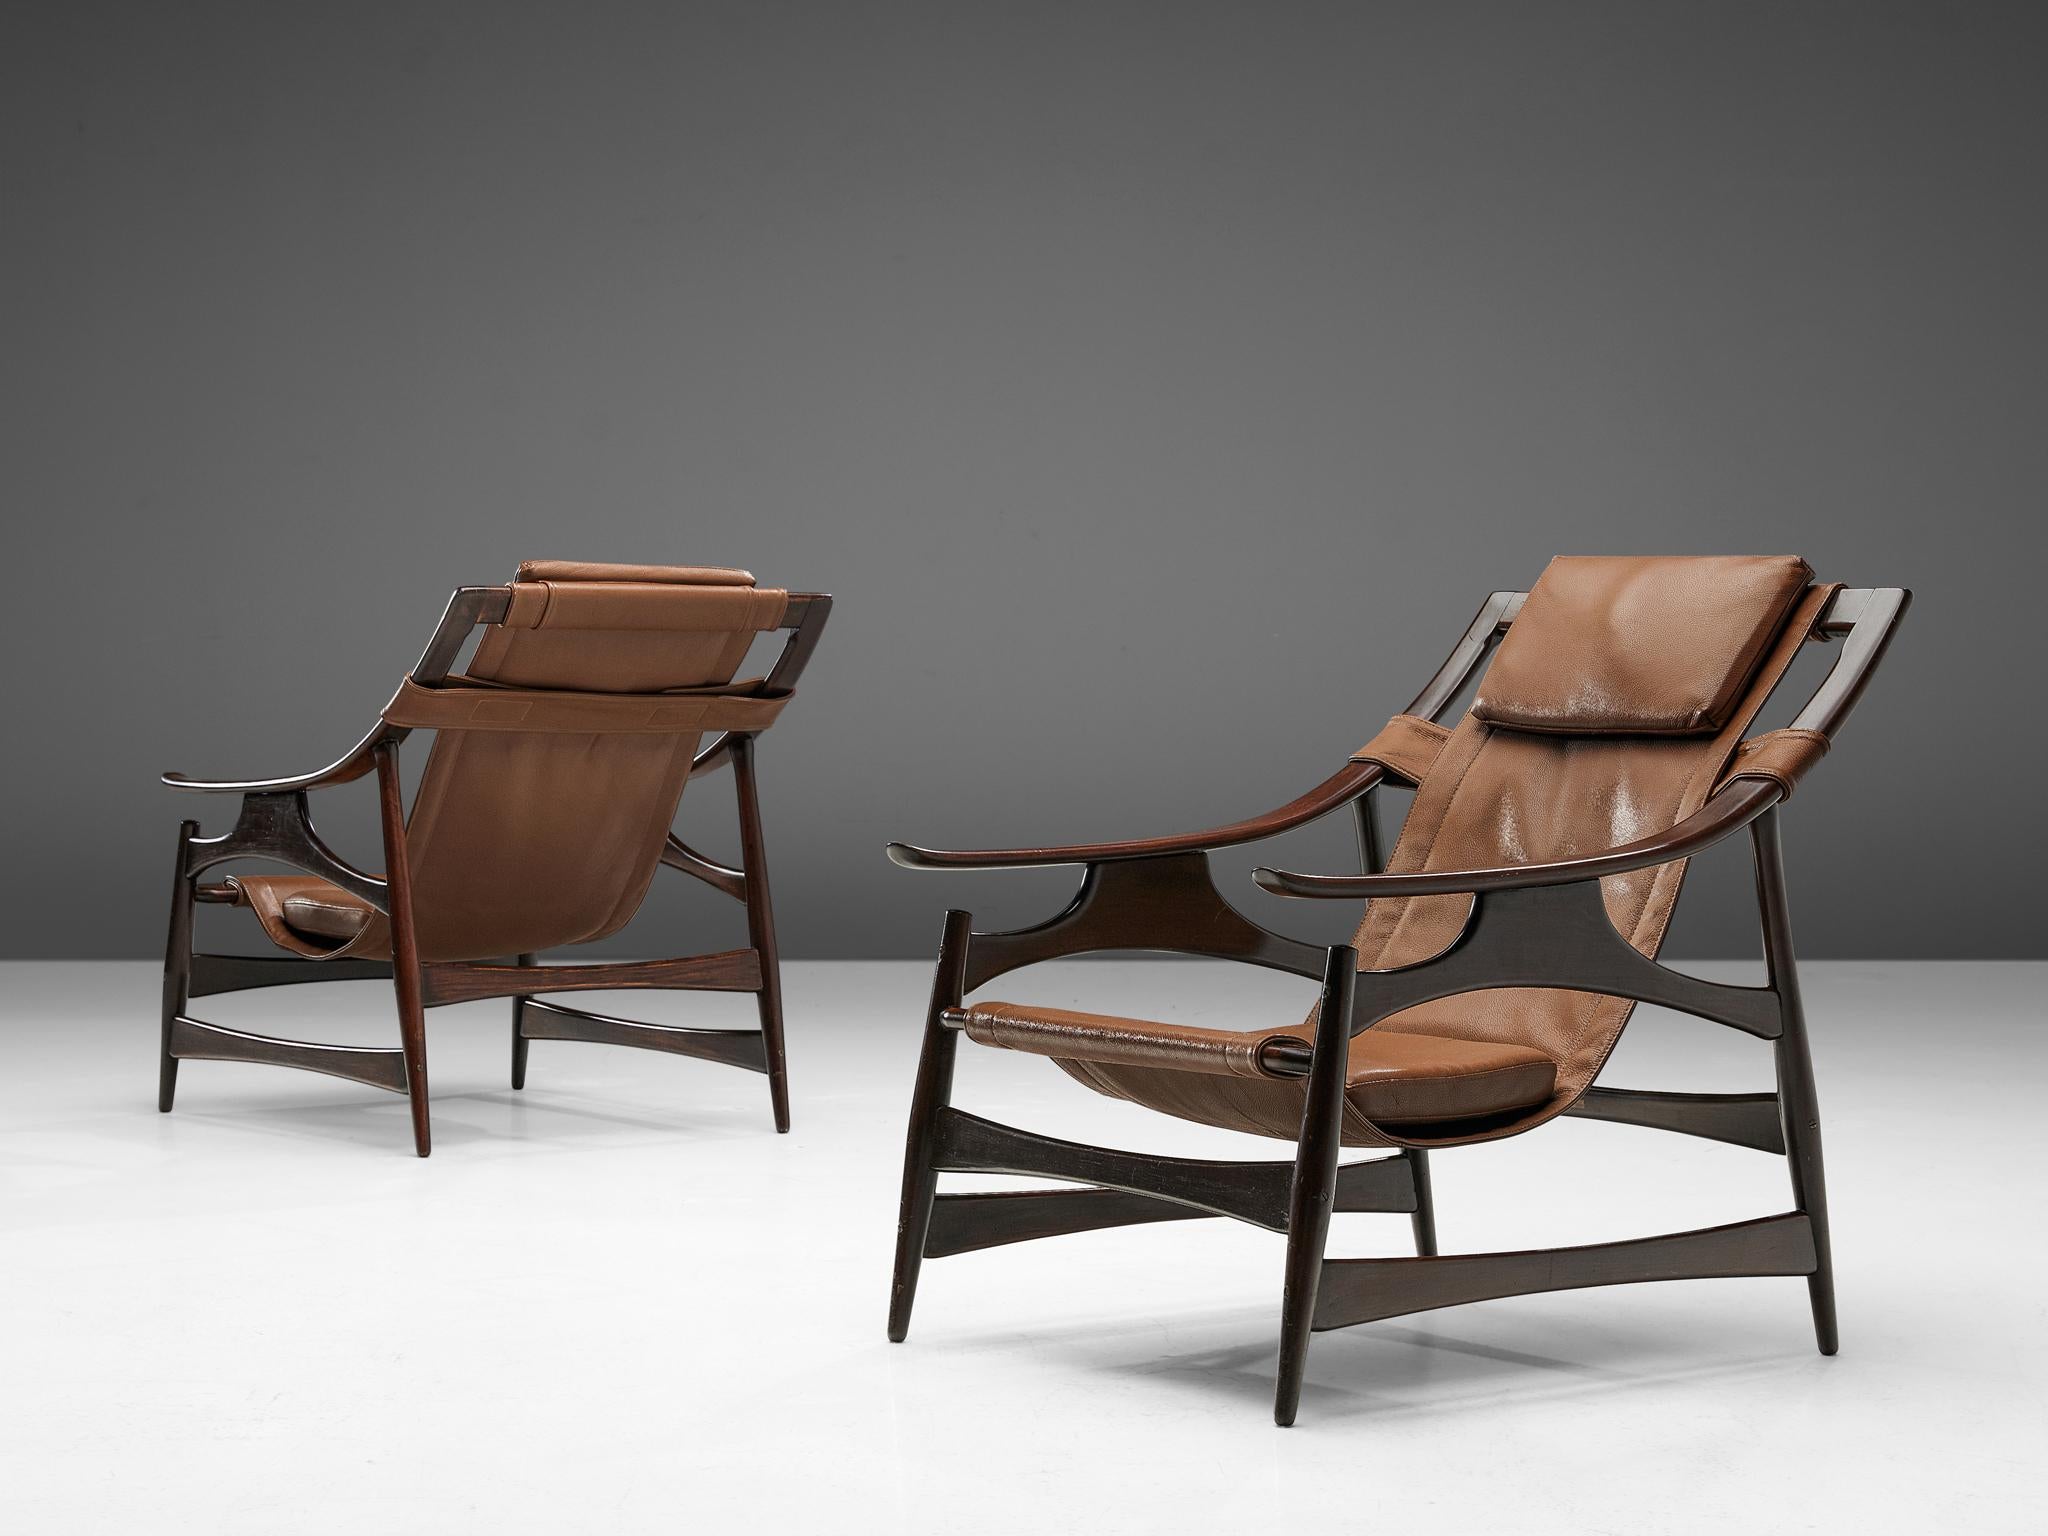 Liceu de Artes e Oficios, lounge chair, darkened embuia wood and leather, Brazil, 1960s. 

Beautiful lounge chair in dark Brazilian walnut with a brown leather  upholstery. The frame is a sort of wooden skeleton. It has an open character with